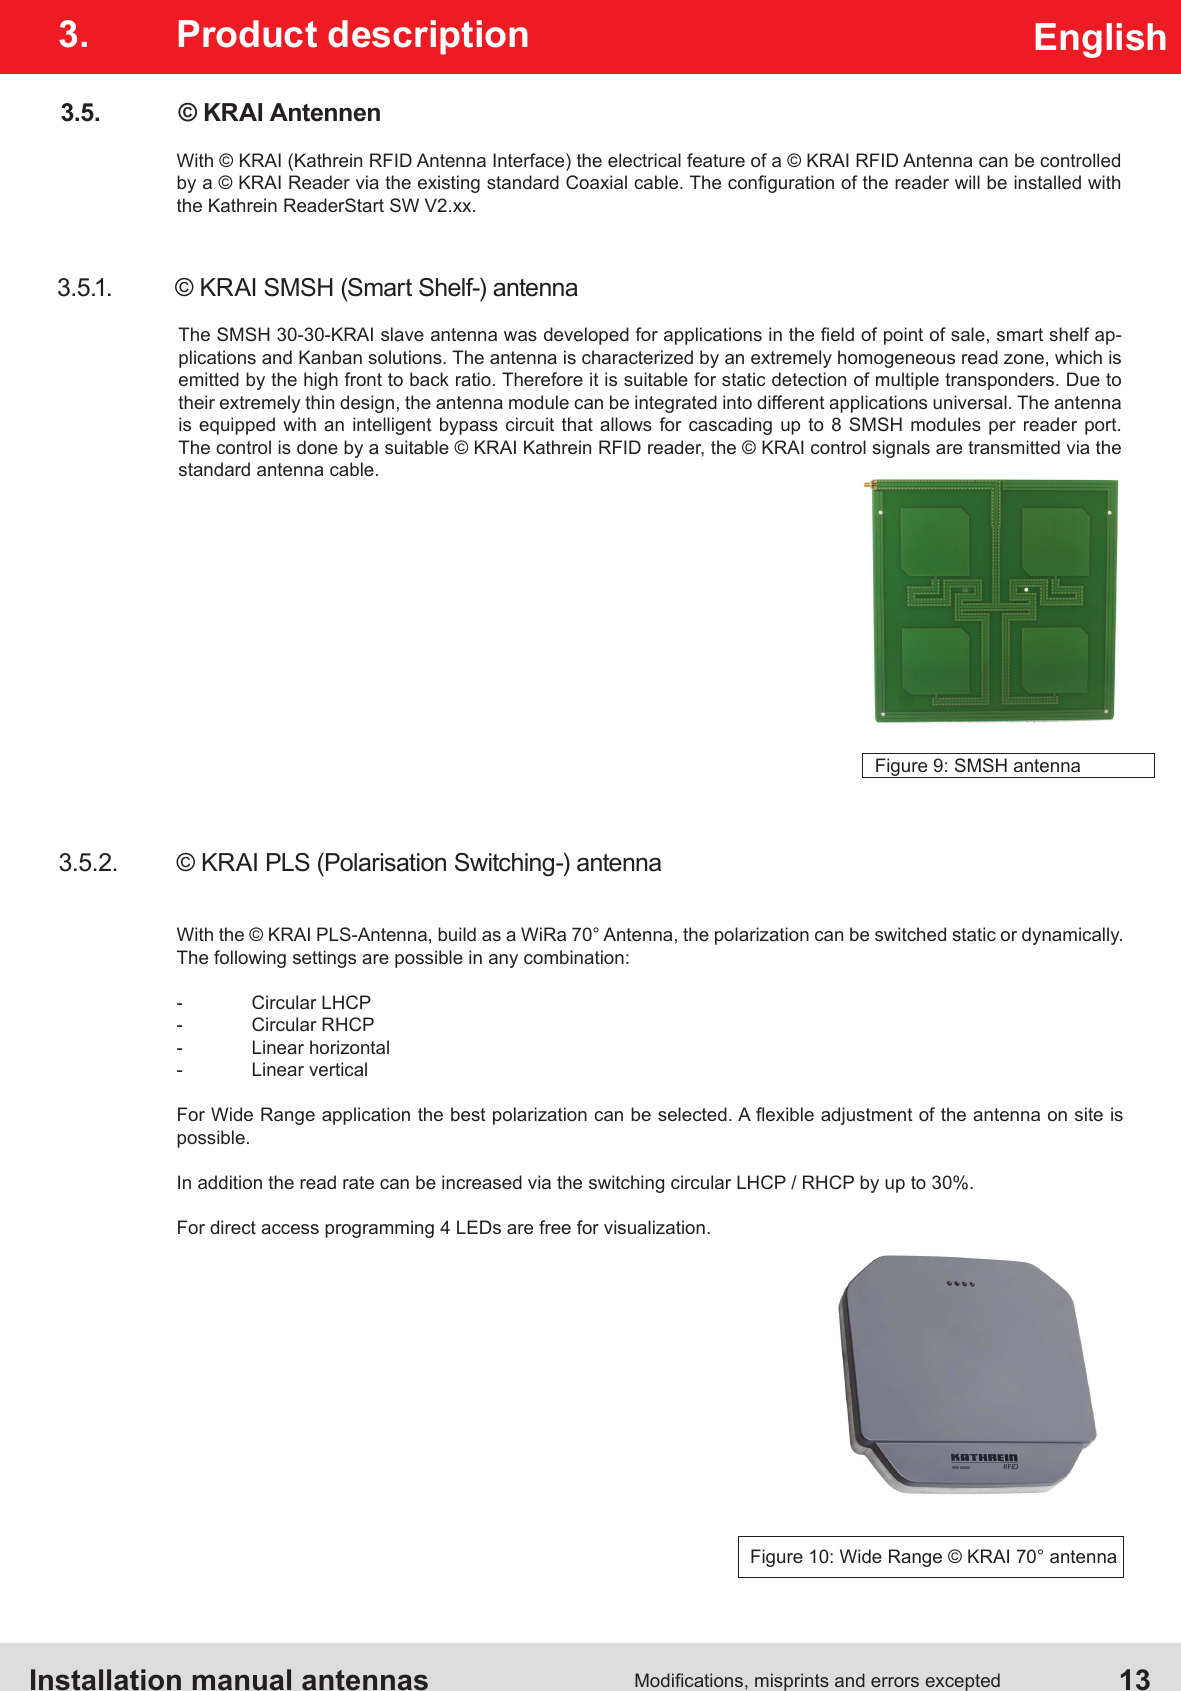 Installation manual antennas   13Modications, misprints and errors exceptedEnglish3.  Product description3.5.  © KRAI AntennenWith © KRAI (Kathrein RFID Antenna Interface) the electrical feature of a © KRAI RFID Antenna can be controlled by a © KRAI Reader via the existing standard Coaxial cable. The conguration of the reader will be installed with the Kathrein ReaderStart SW V2.xx.3.5.1.  © KRAI SMSH (Smart Shelf-) antennaThe SMSH 30-30-KRAI slave antenna was developed for applications in the eld of point of sale, smart shelf ap-plications and Kanban solutions. The antenna is characterized by an extremely homogeneous read zone, which is emitted by the high front to back ratio. Therefore it is suitable for static detection of multiple transponders. Due to their extremely thin design, the antenna module can be integrated into different applications universal. The antenna is equipped with an intelligent bypass circuit that allows for cascading up to 8 SMSH modules per reader port. The control is done by a suitable © KRAI Kathrein RFID reader, the © KRAI control signals are transmitted via the standard antenna cable.Figure 9: SMSH antenna3.5.2.  © KRAI PLS (Polarisation Switching-) antennaWith the © KRAI PLS-Antenna, build as a WiRa 70° Antenna, the polarization can be switched static or dynamically. The following settings are possible in any combination:-  Circular LHCP-  Circular RHCP-  Linear horizontal-  Linear verticalFor Wide Range application the best polarization can be selected. A exible adjustment of the antenna on site is possible. In addition the read rate can be increased via the switching circular LHCP / RHCP by up to 30%.For direct access programming 4 LEDs are free for visualization.Figure 10: Wide Range © KRAI 70° antenna